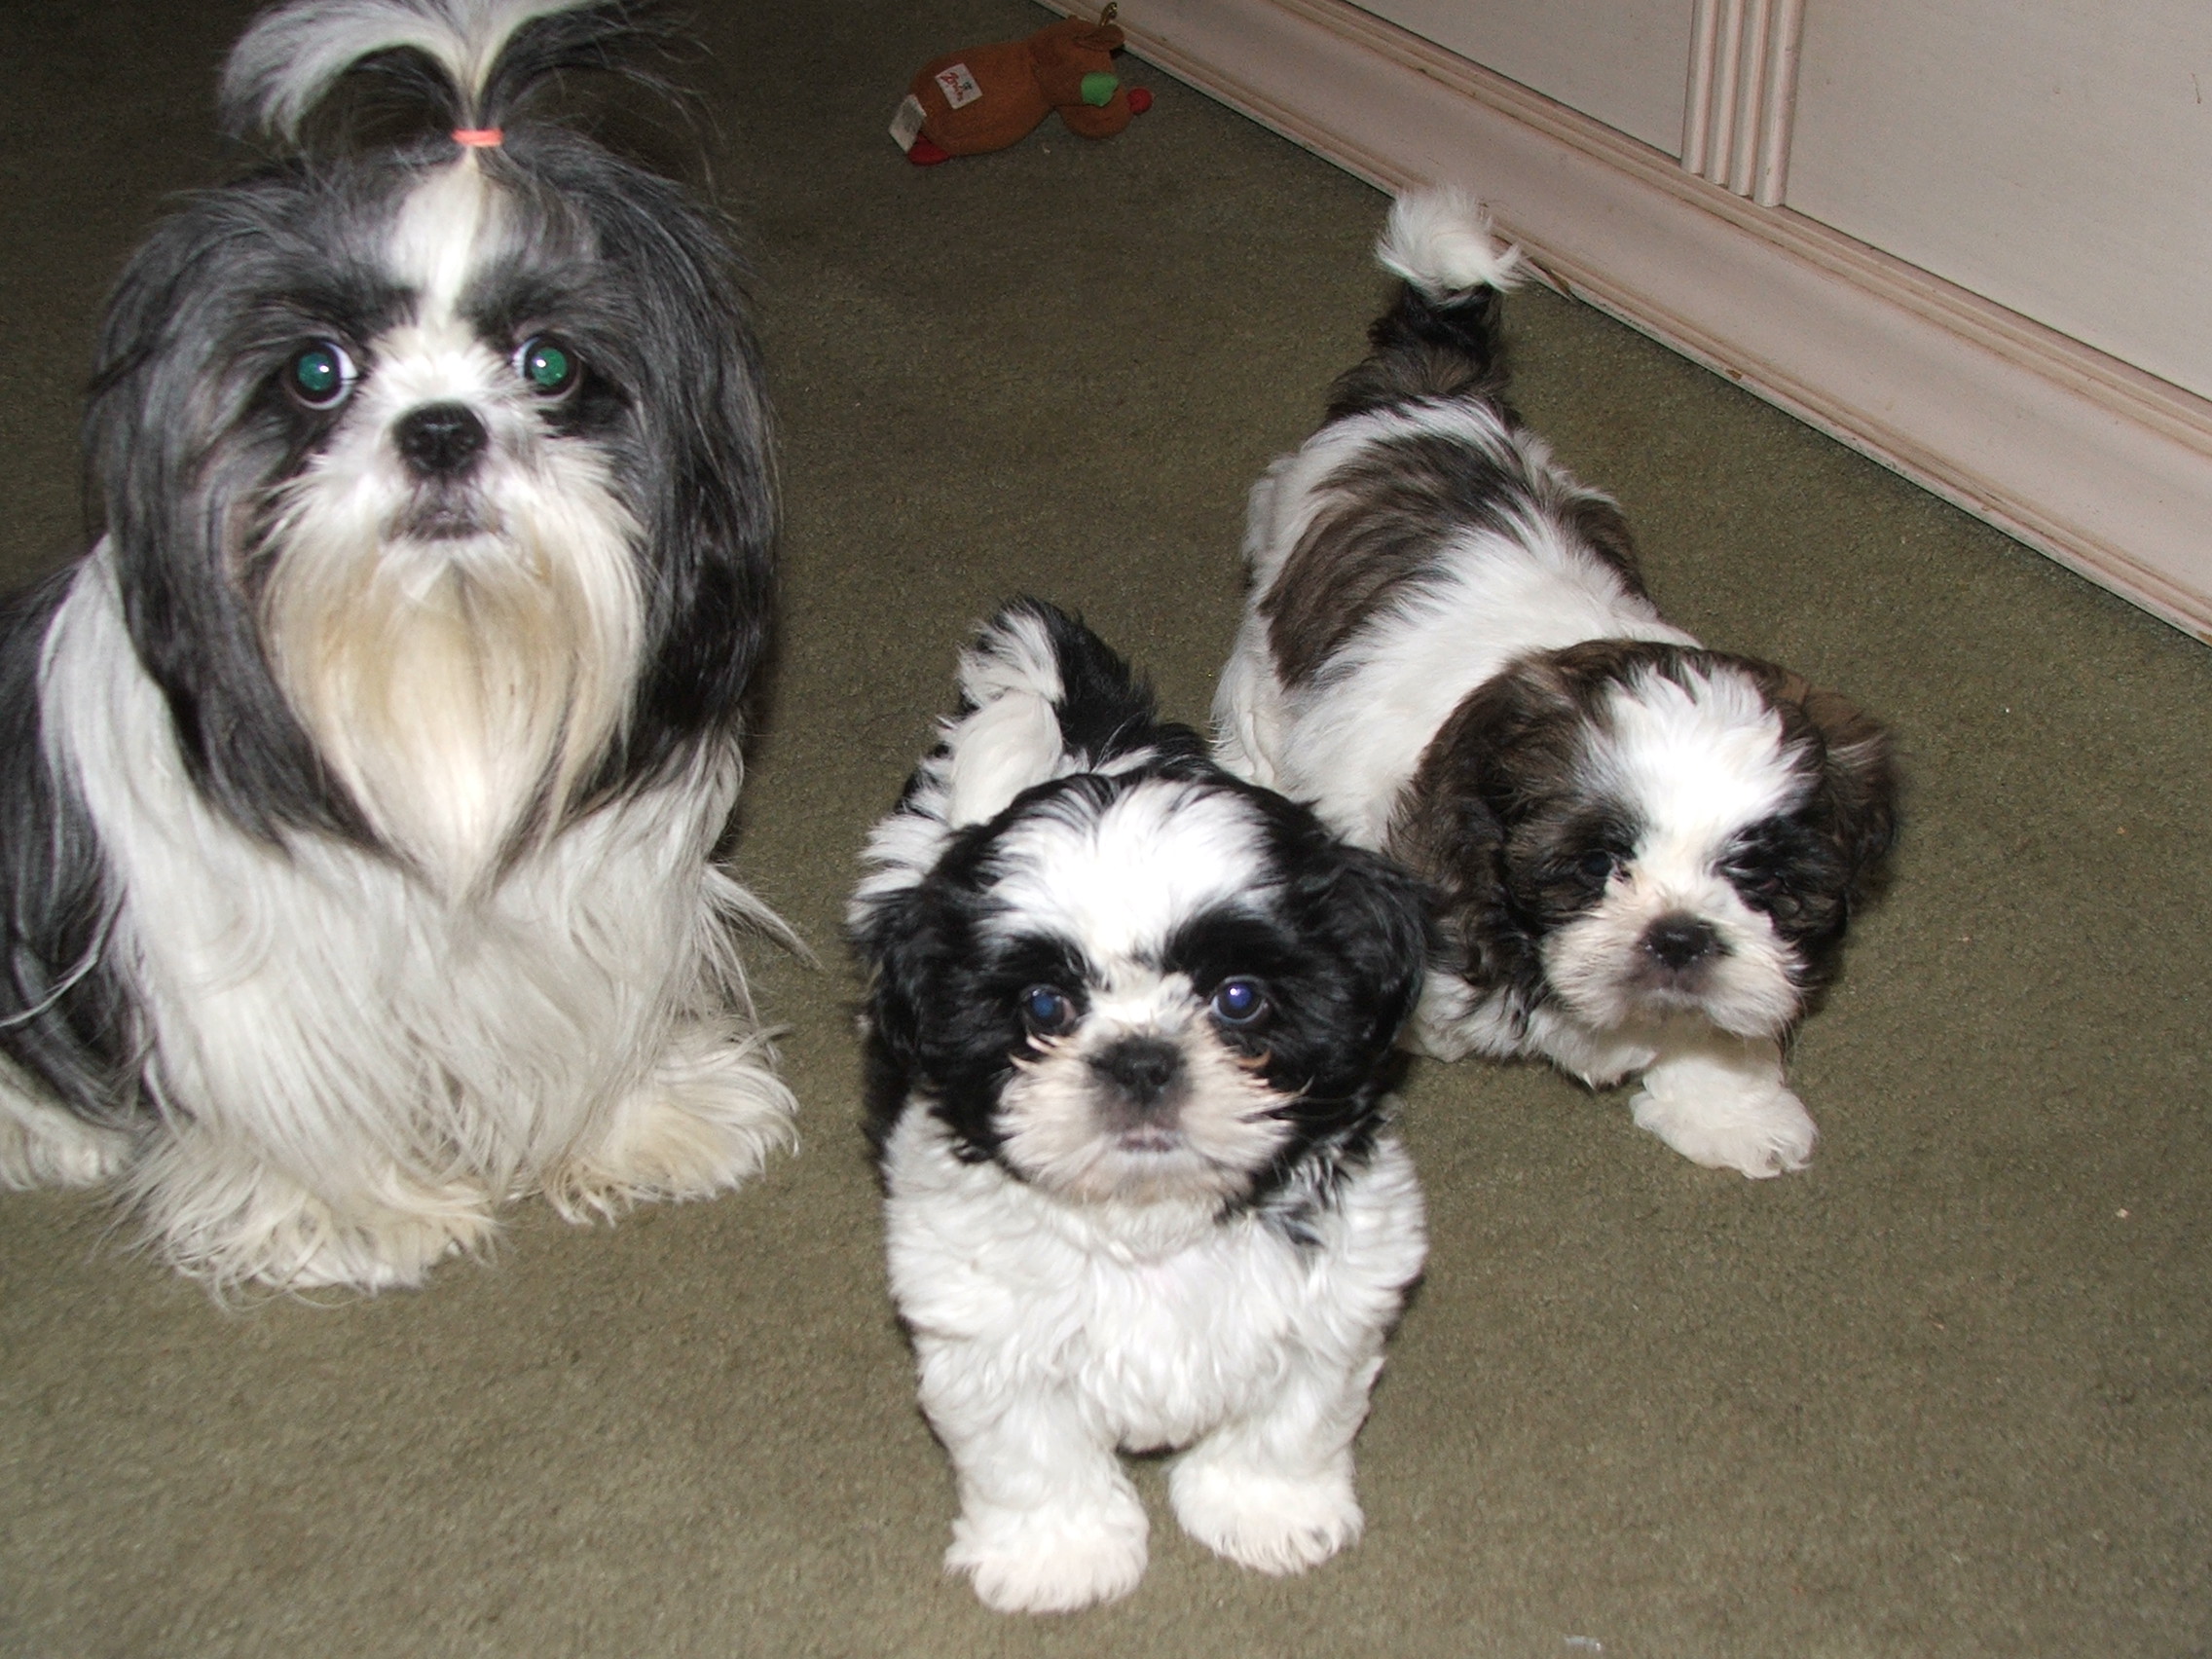 Shih+tzu+puppies+for+sale